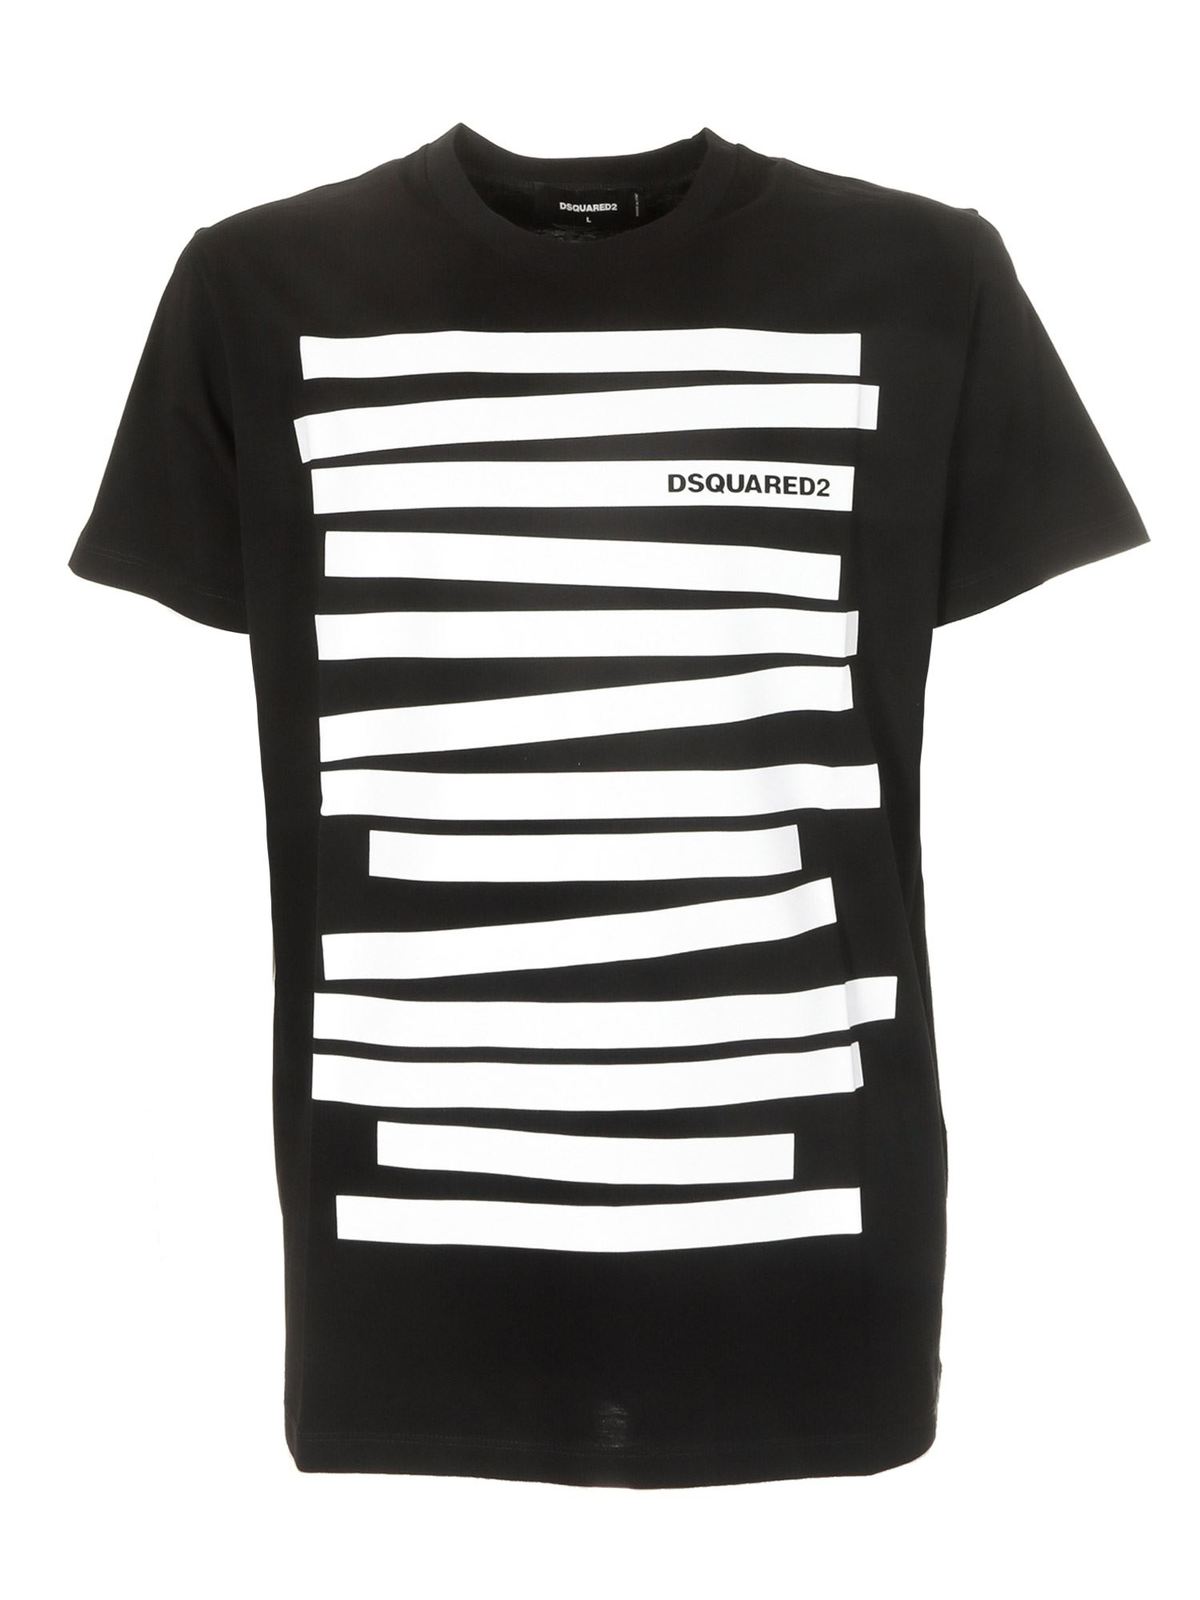 DSQUARED2 GLASSIFIED T-SHIRT IN BLACK